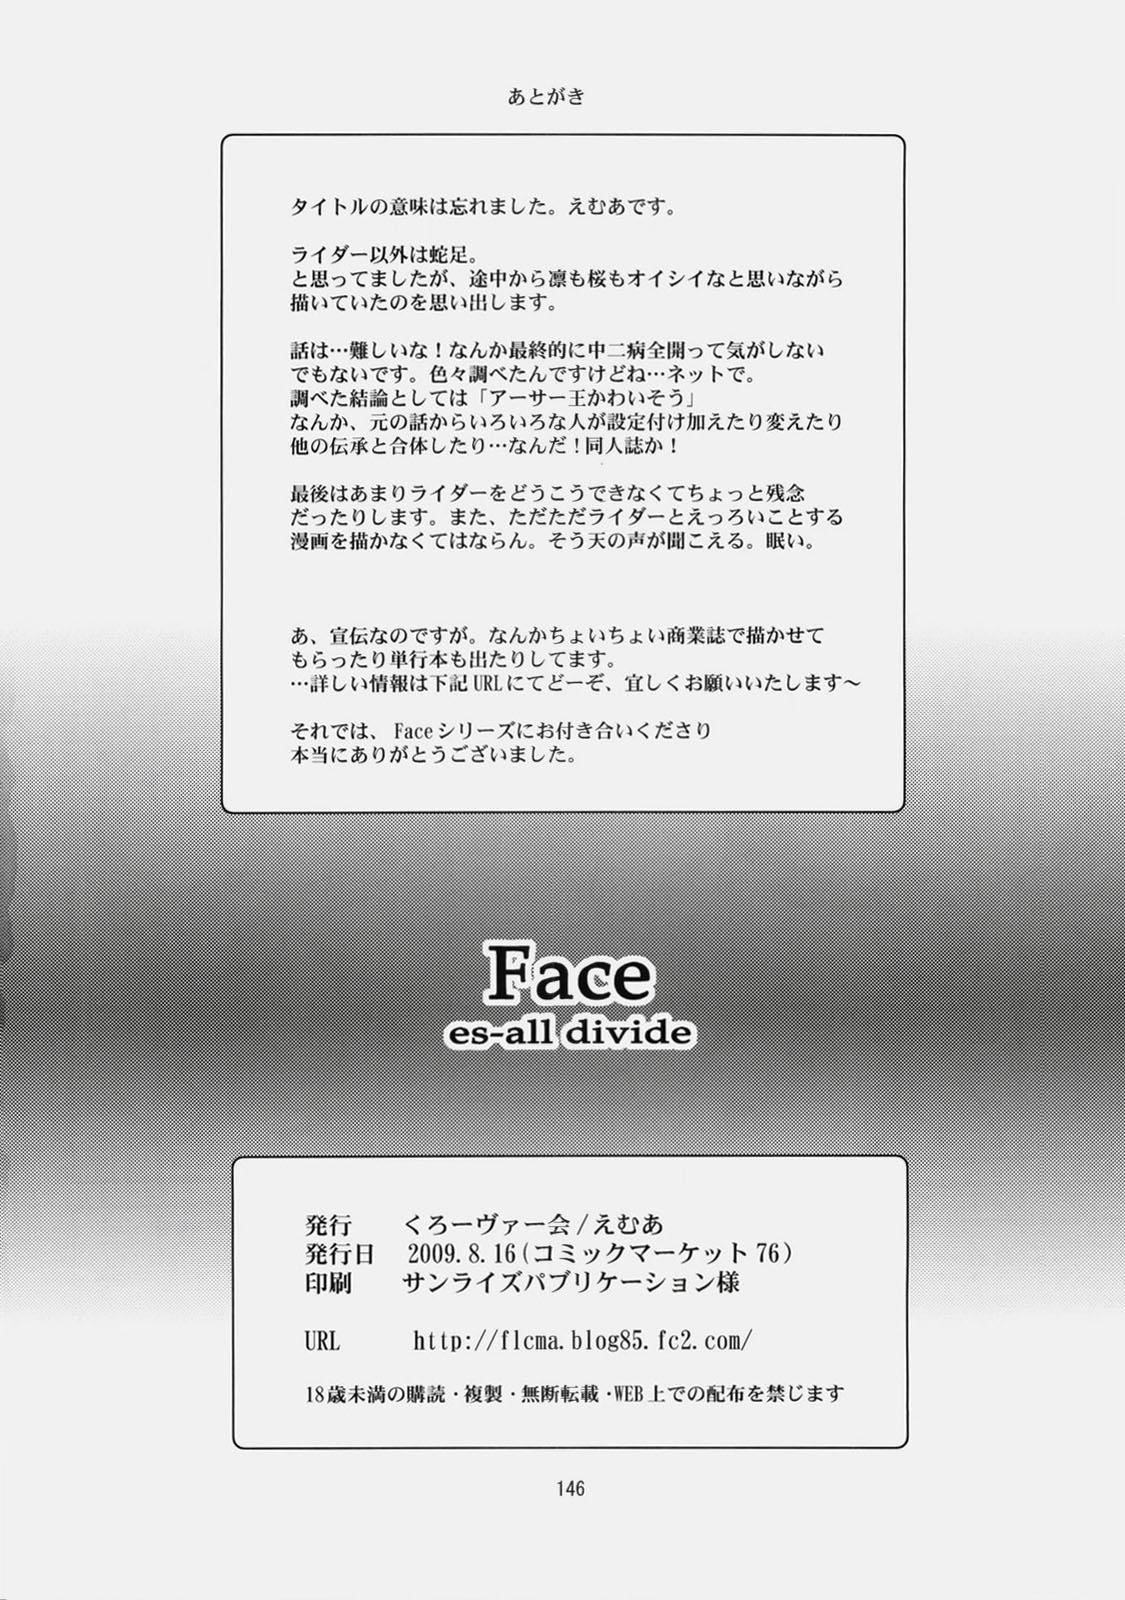 Gay Twinks Face es-all divide - Fate stay night Amateur Cum - Page 143